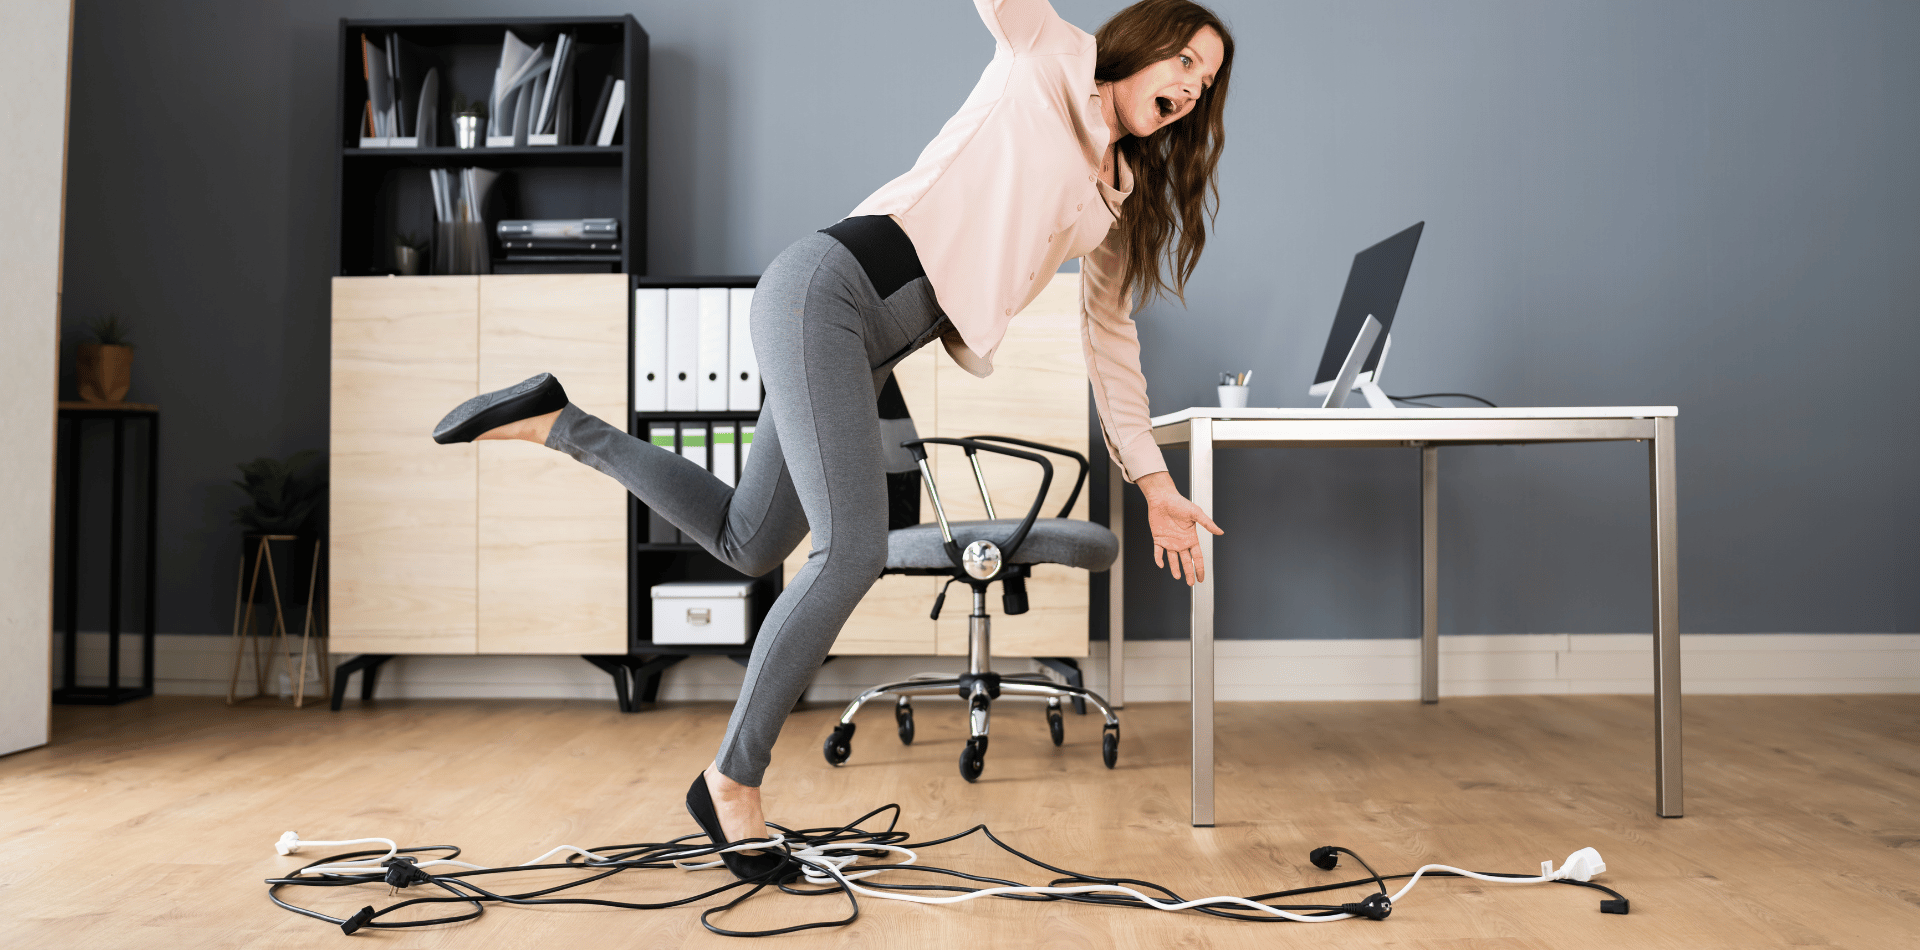 Woman tripping over power cords